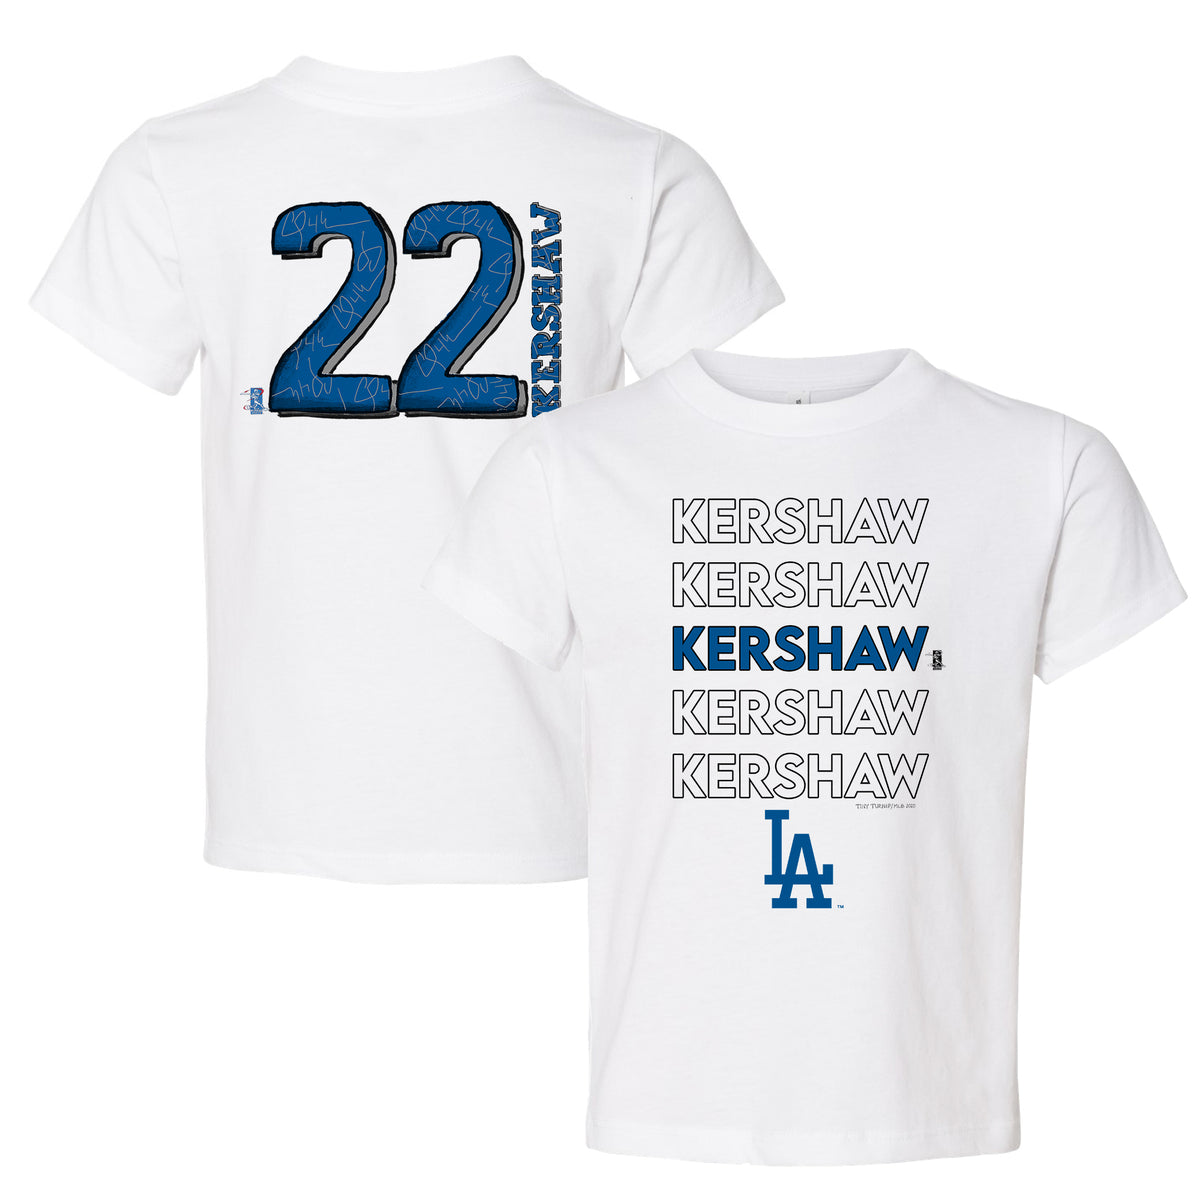 Clayton Kershaw Official Youth Home Jersey